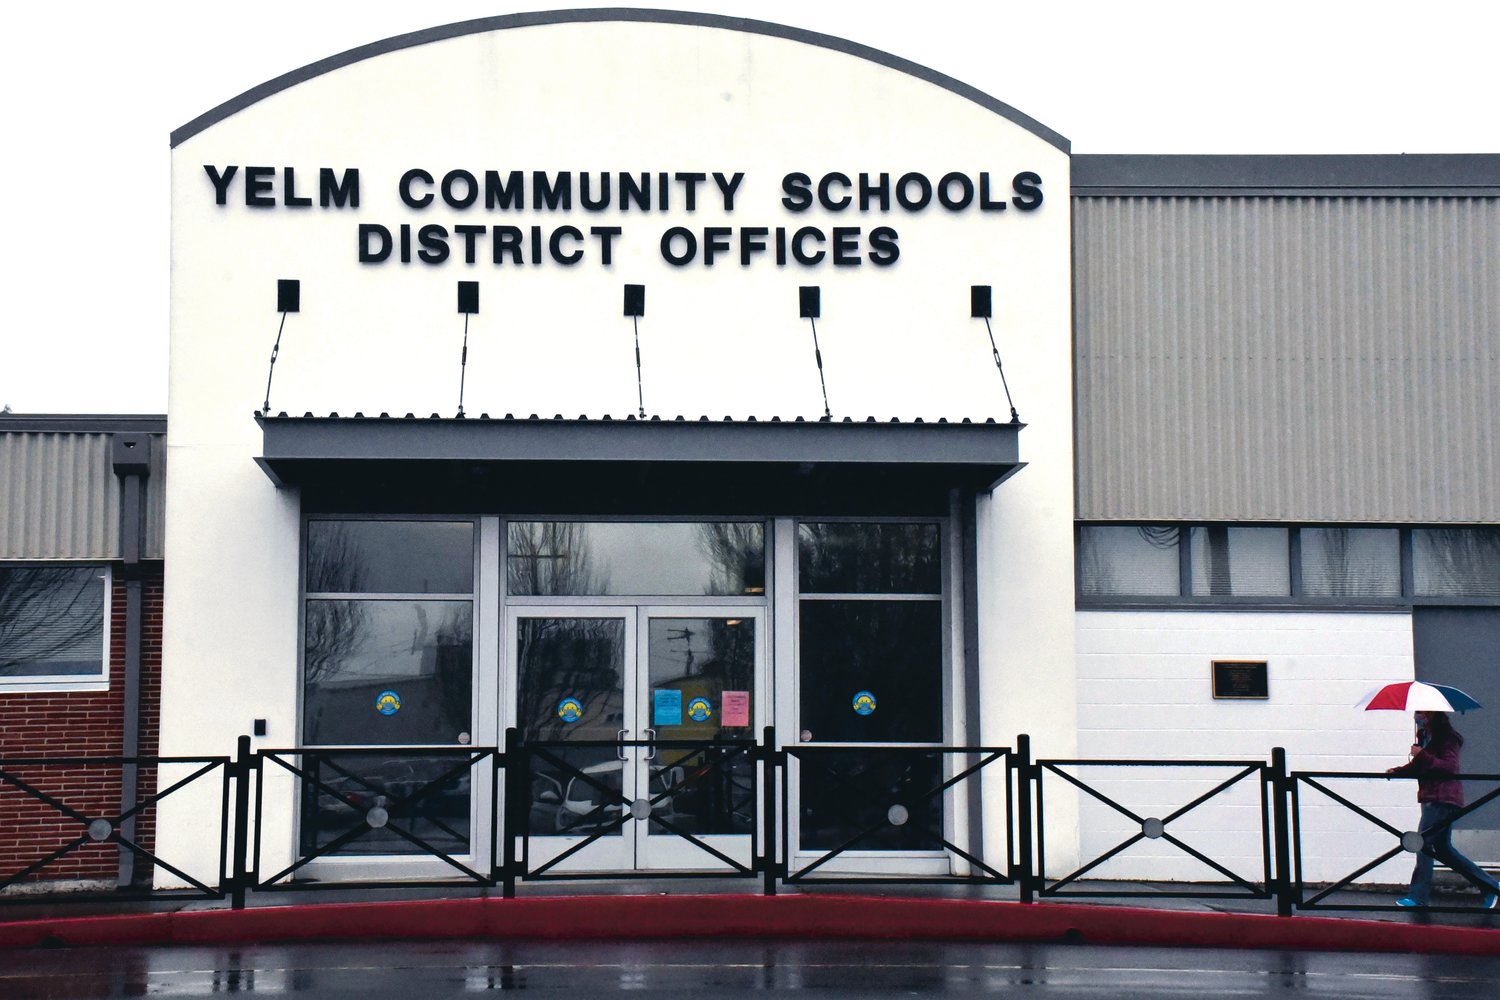 The Yelm Community Schools District Office is pictured.